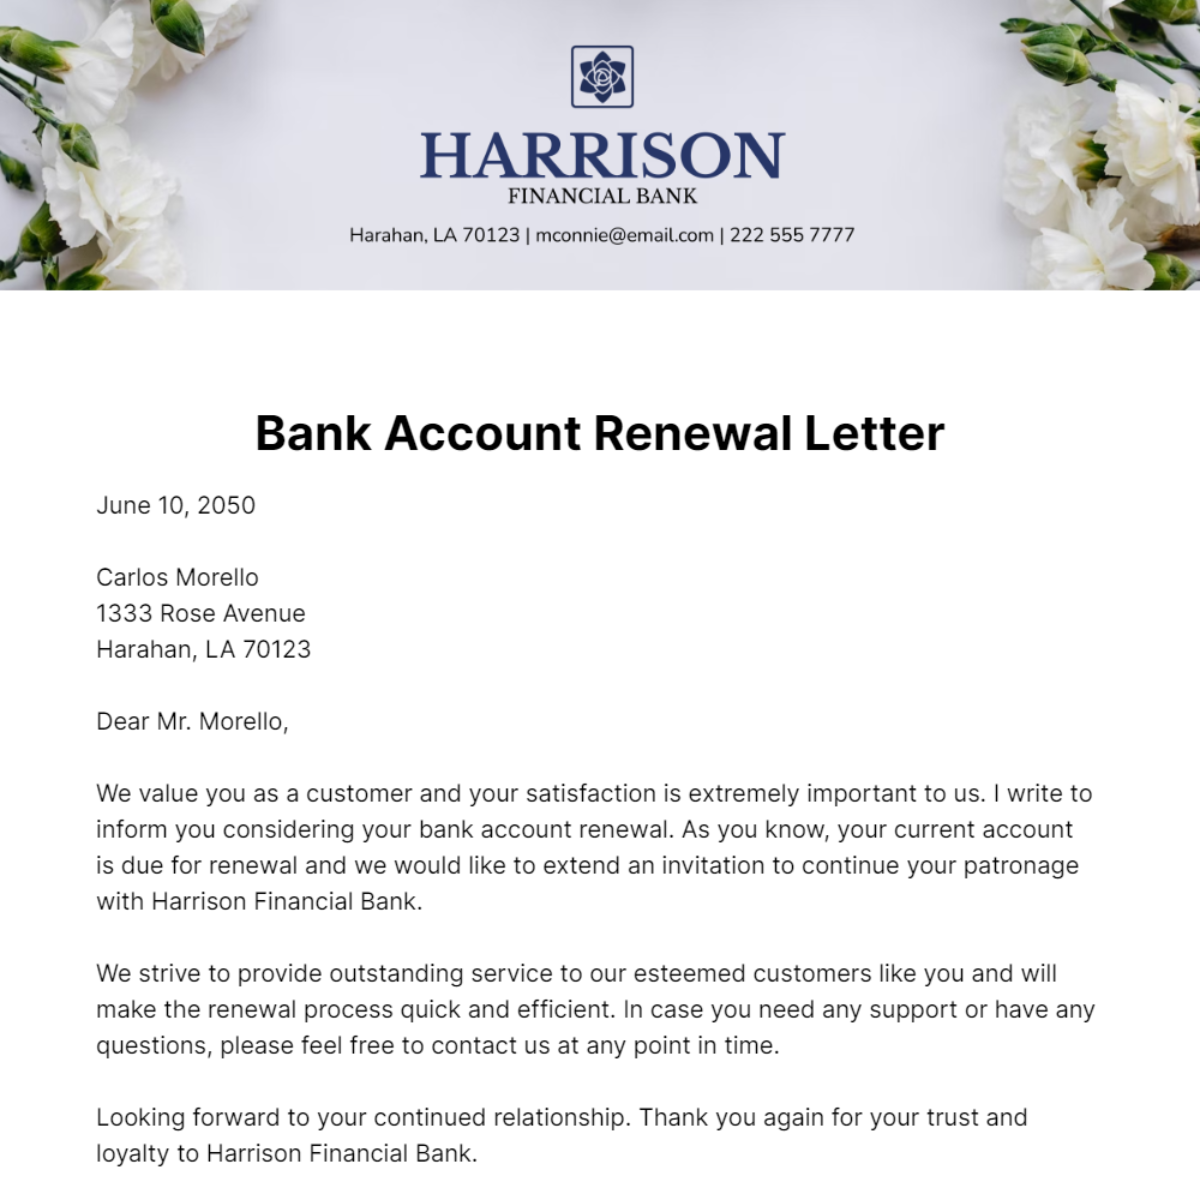 Bank Account Renewal Letter   Template